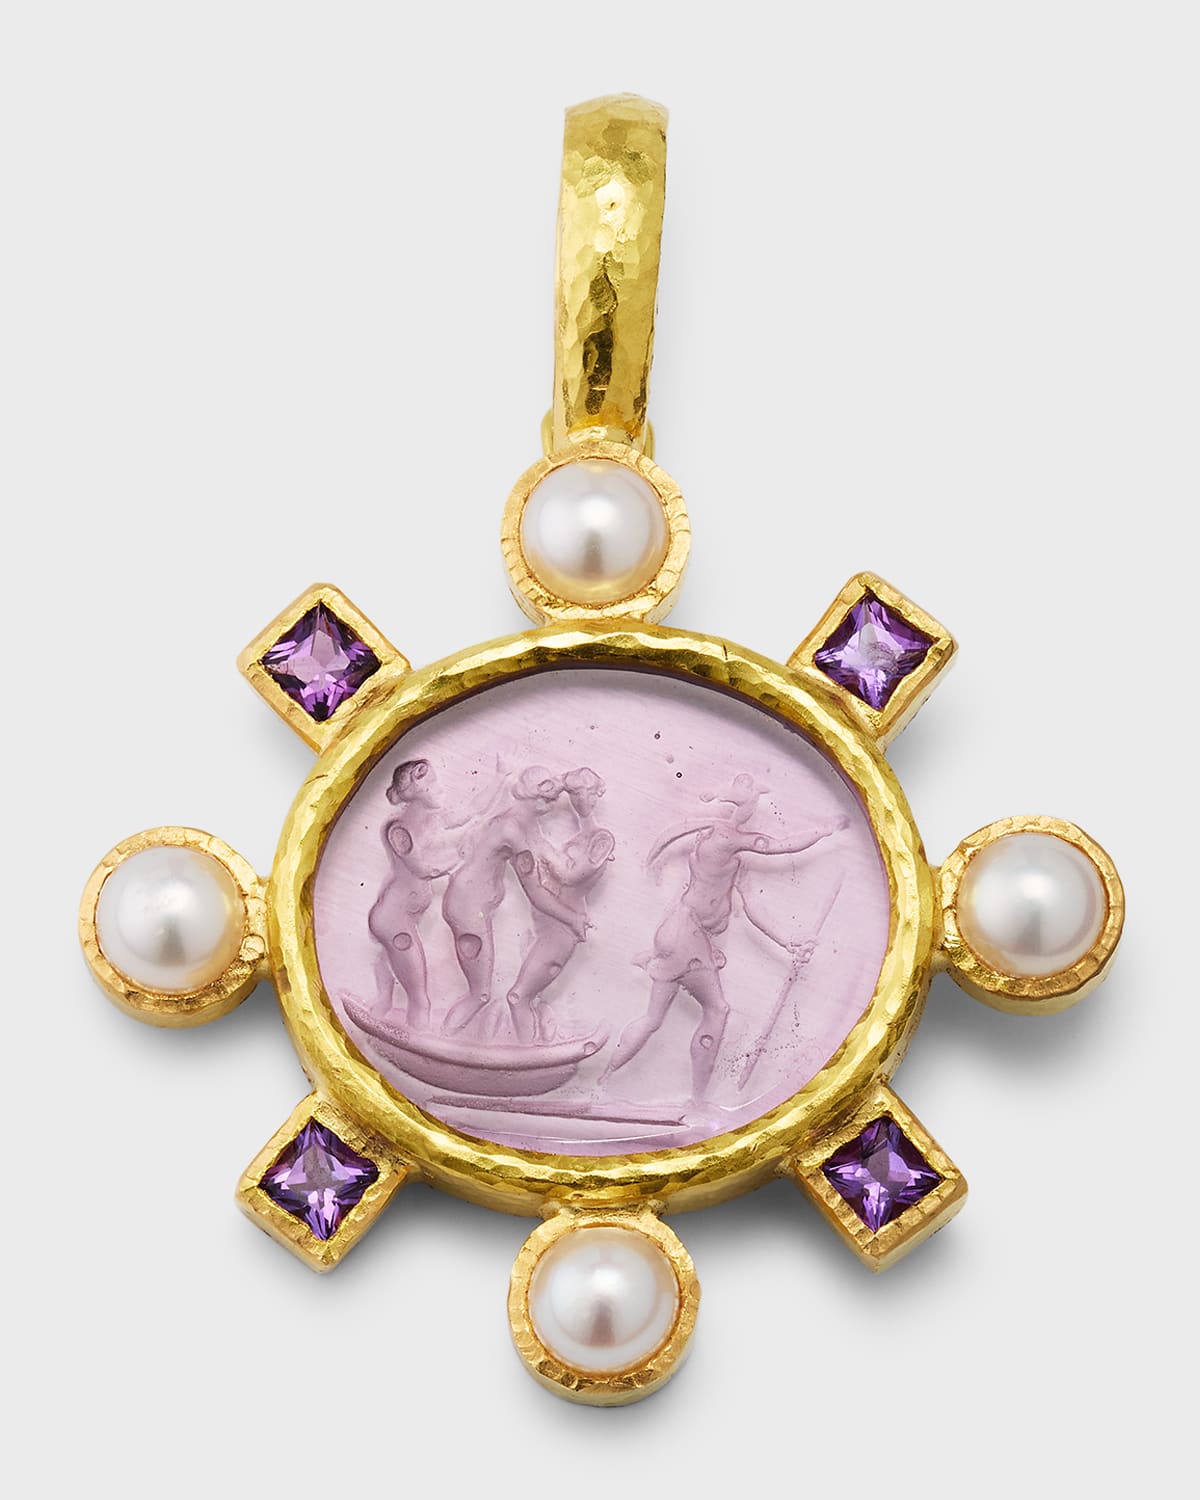 19K Goddess on Boat Pendant with Pearls and Moonstones